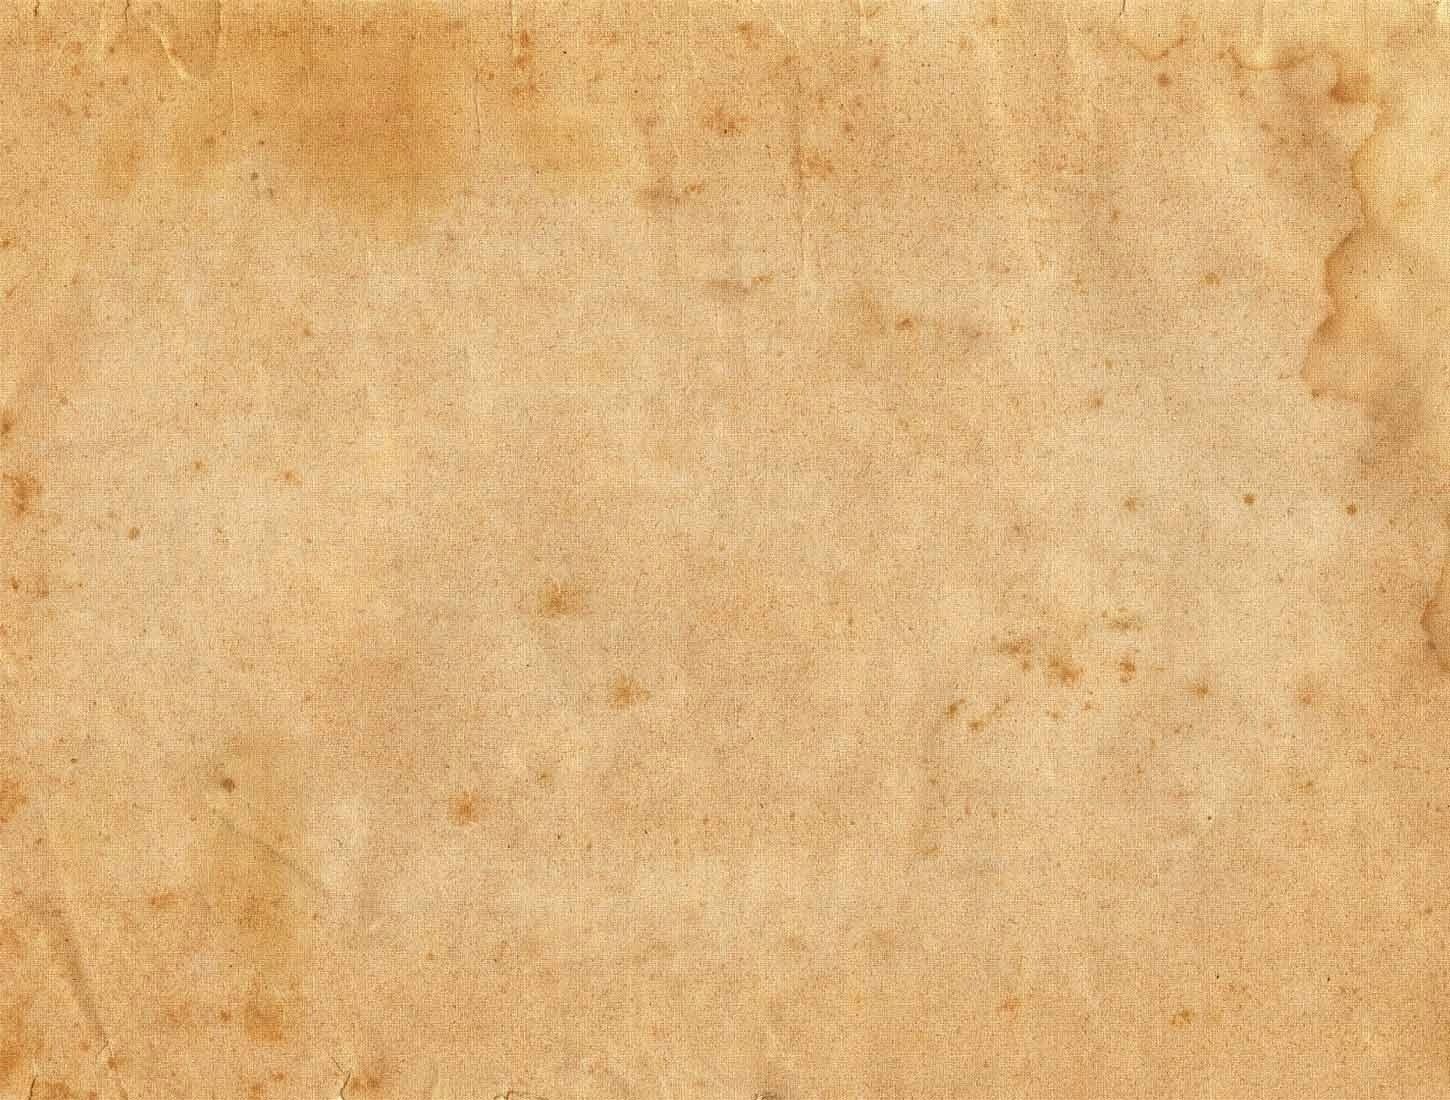 Old Newspaper Background Fresh Old Beige Blank Paper Free Ppt Background for Your Powerpoint Inside Blank Old Newspaper for You of The Hudson